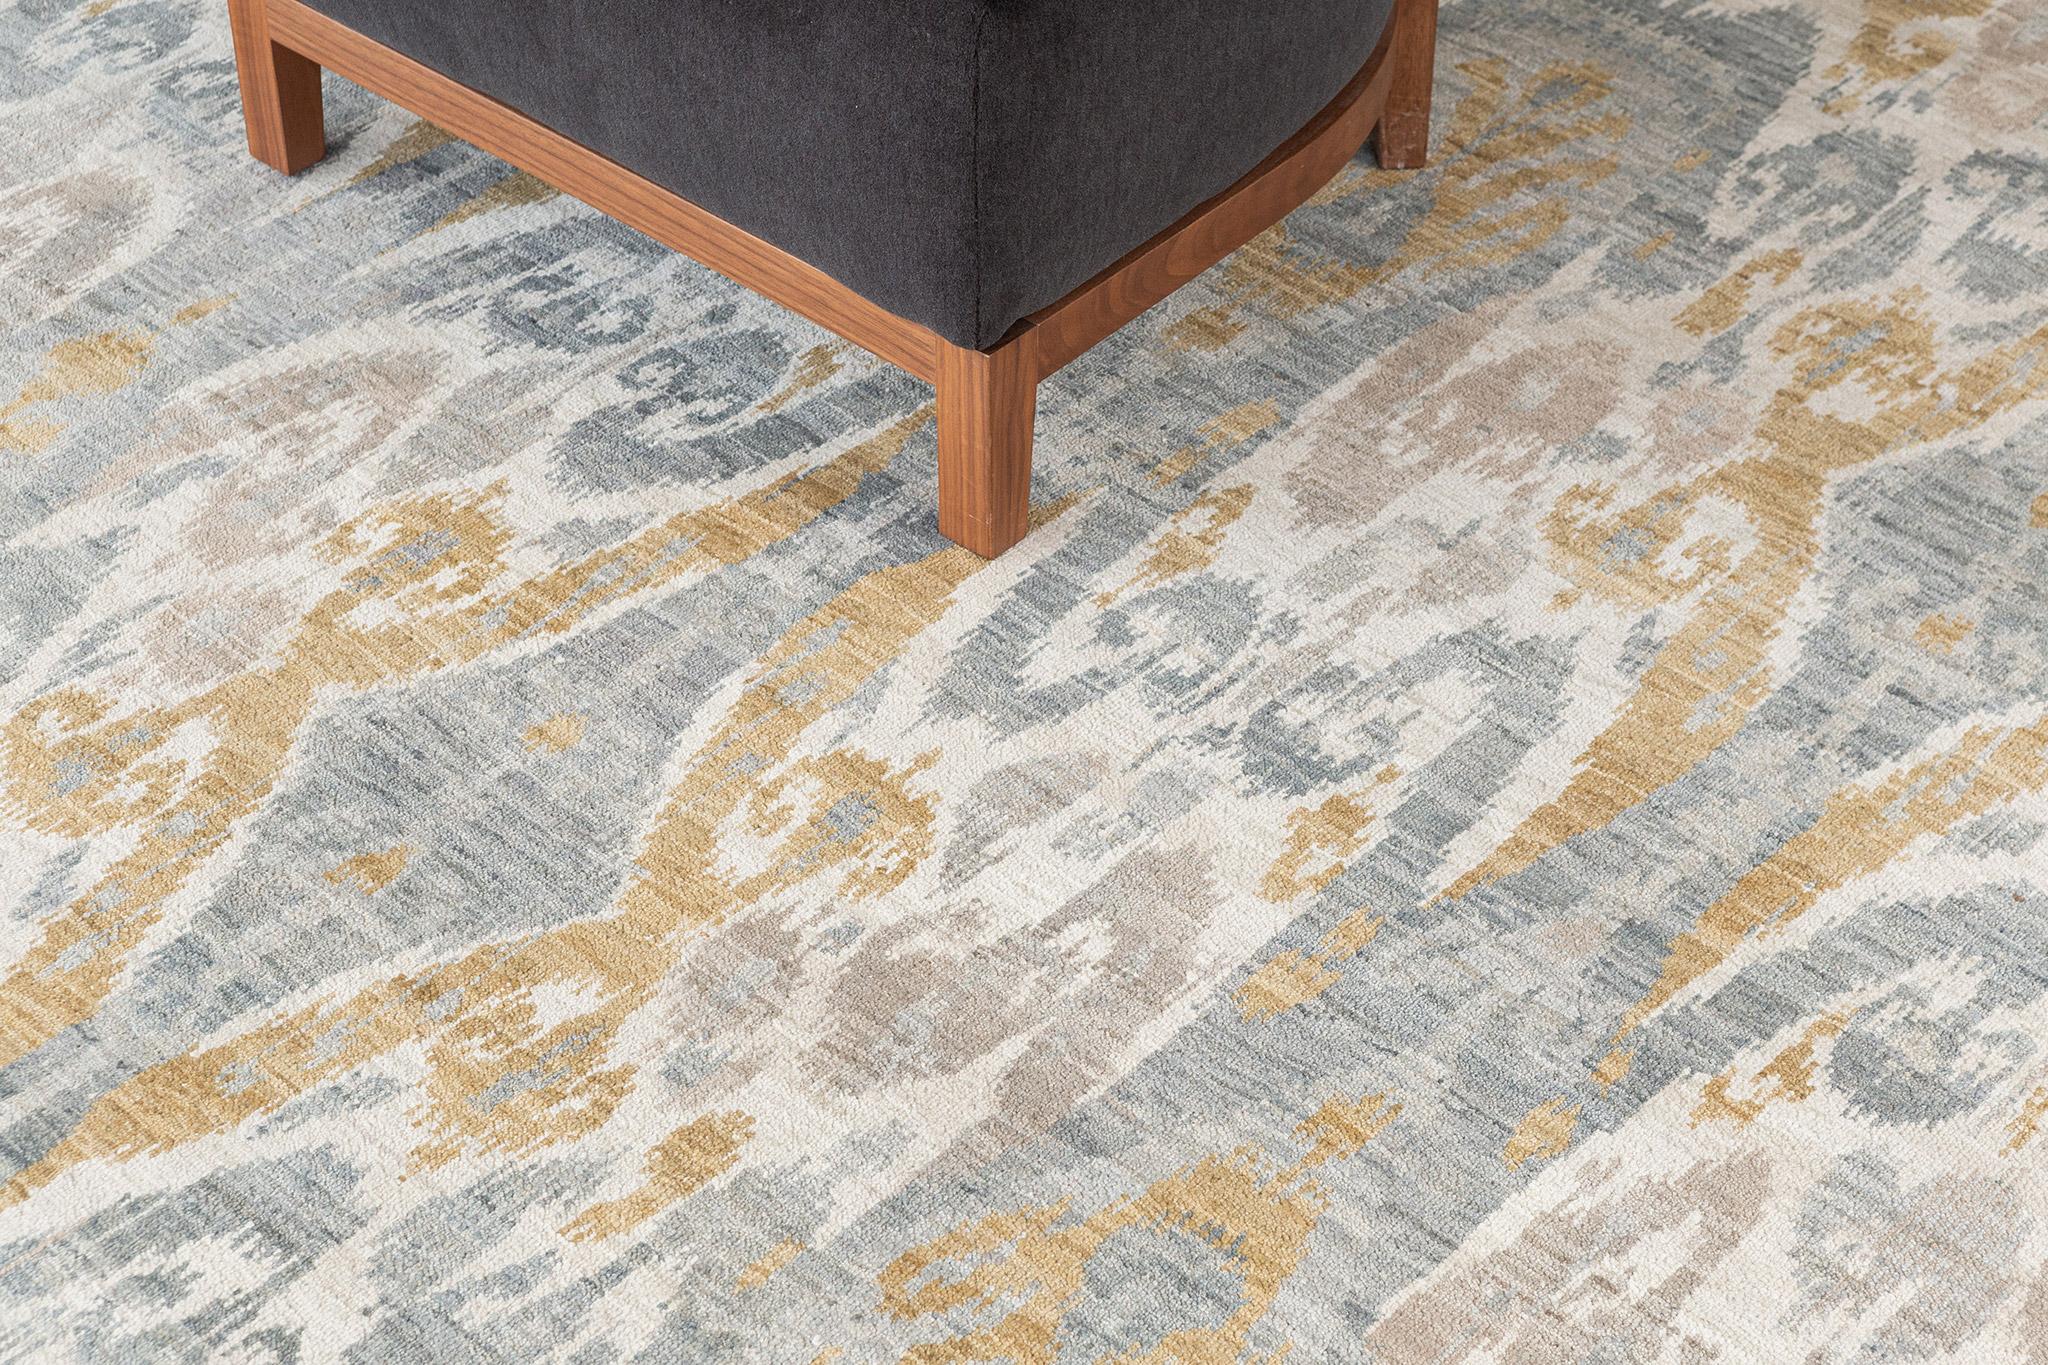 Harmonizing a tranquil and alluring style, this transitional Ikat rug in Tiraz elegantly displays a modern vibe. The abrashed field is covered in a repetitive Ikat pattern running along the ivory field. A perfect way to give your room a fresh,